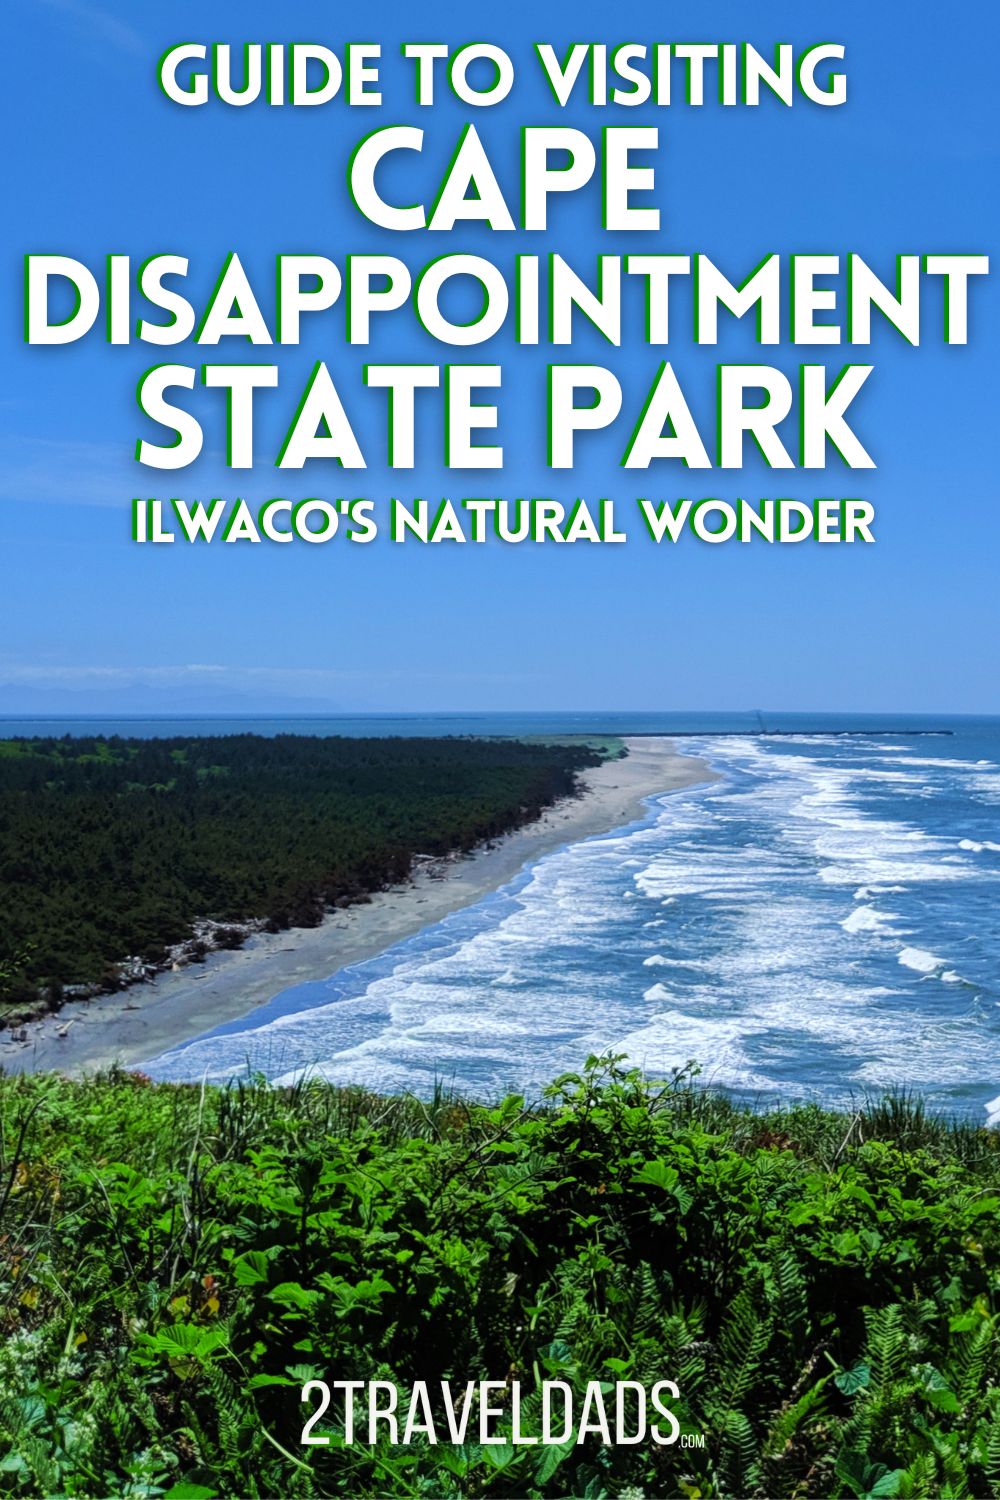 Cape Disappointment State Park in Ilwaco is NOT a disappointment at all! An awesome destination for hiking, biking and lighthouses, Cape Disappointment is great to visit in summer or storm season. Check out things to do and where to stay here!